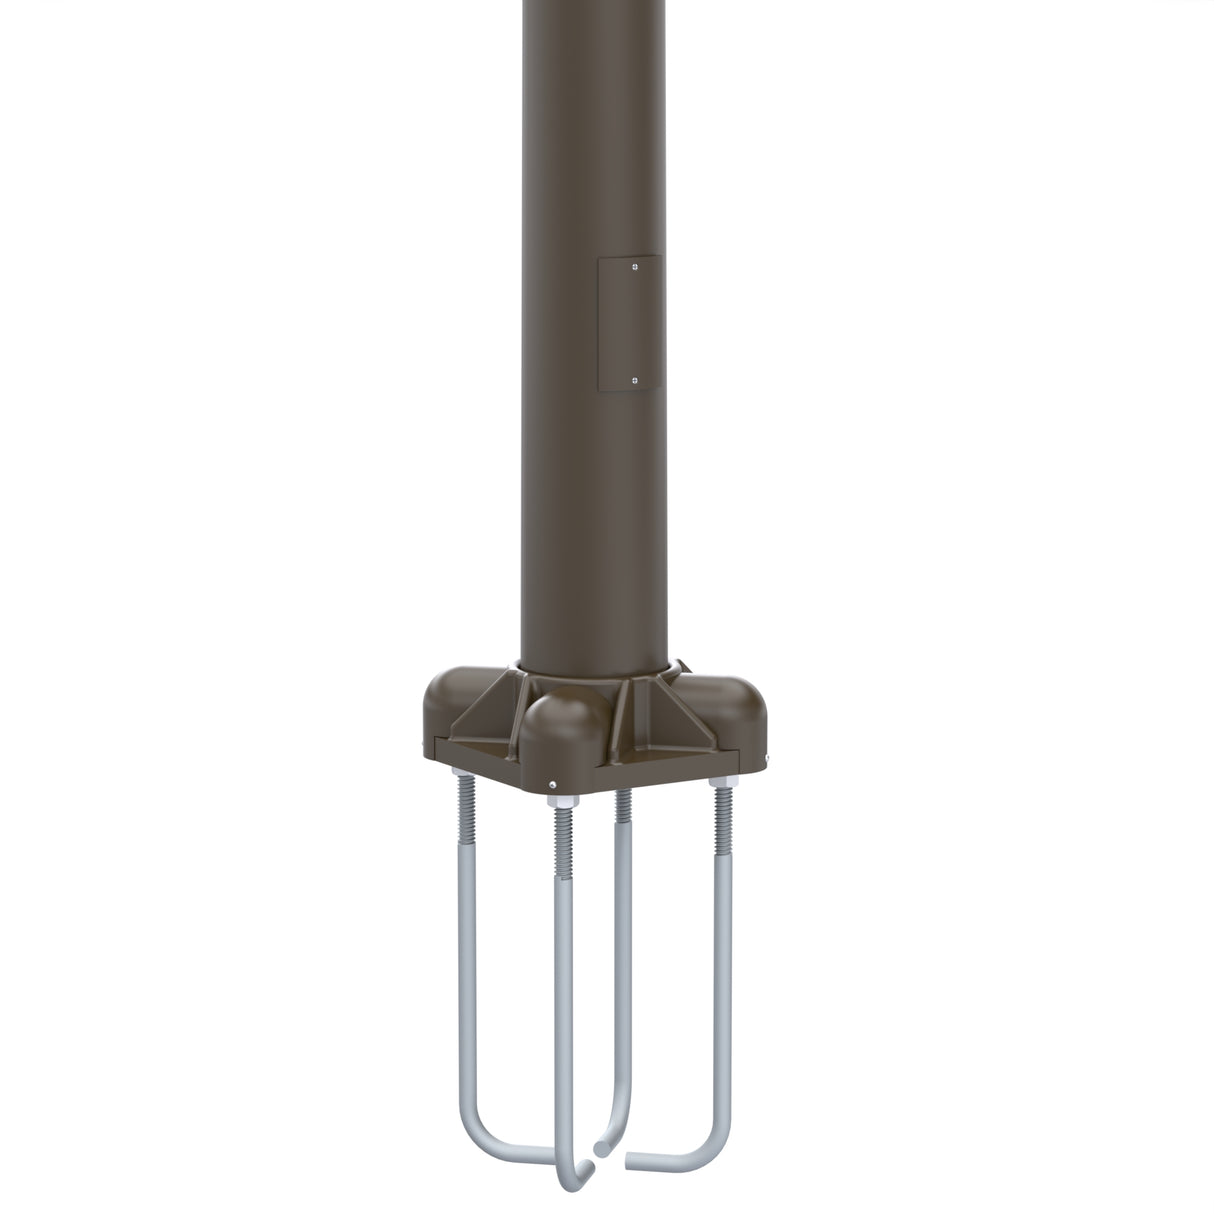 40' Tall x 8.0" Base OD x 4.5" Top OD x 0.188" Thick, Round Tapered Aluminum, Anchor Base Light Pole with 6' Davit Arm